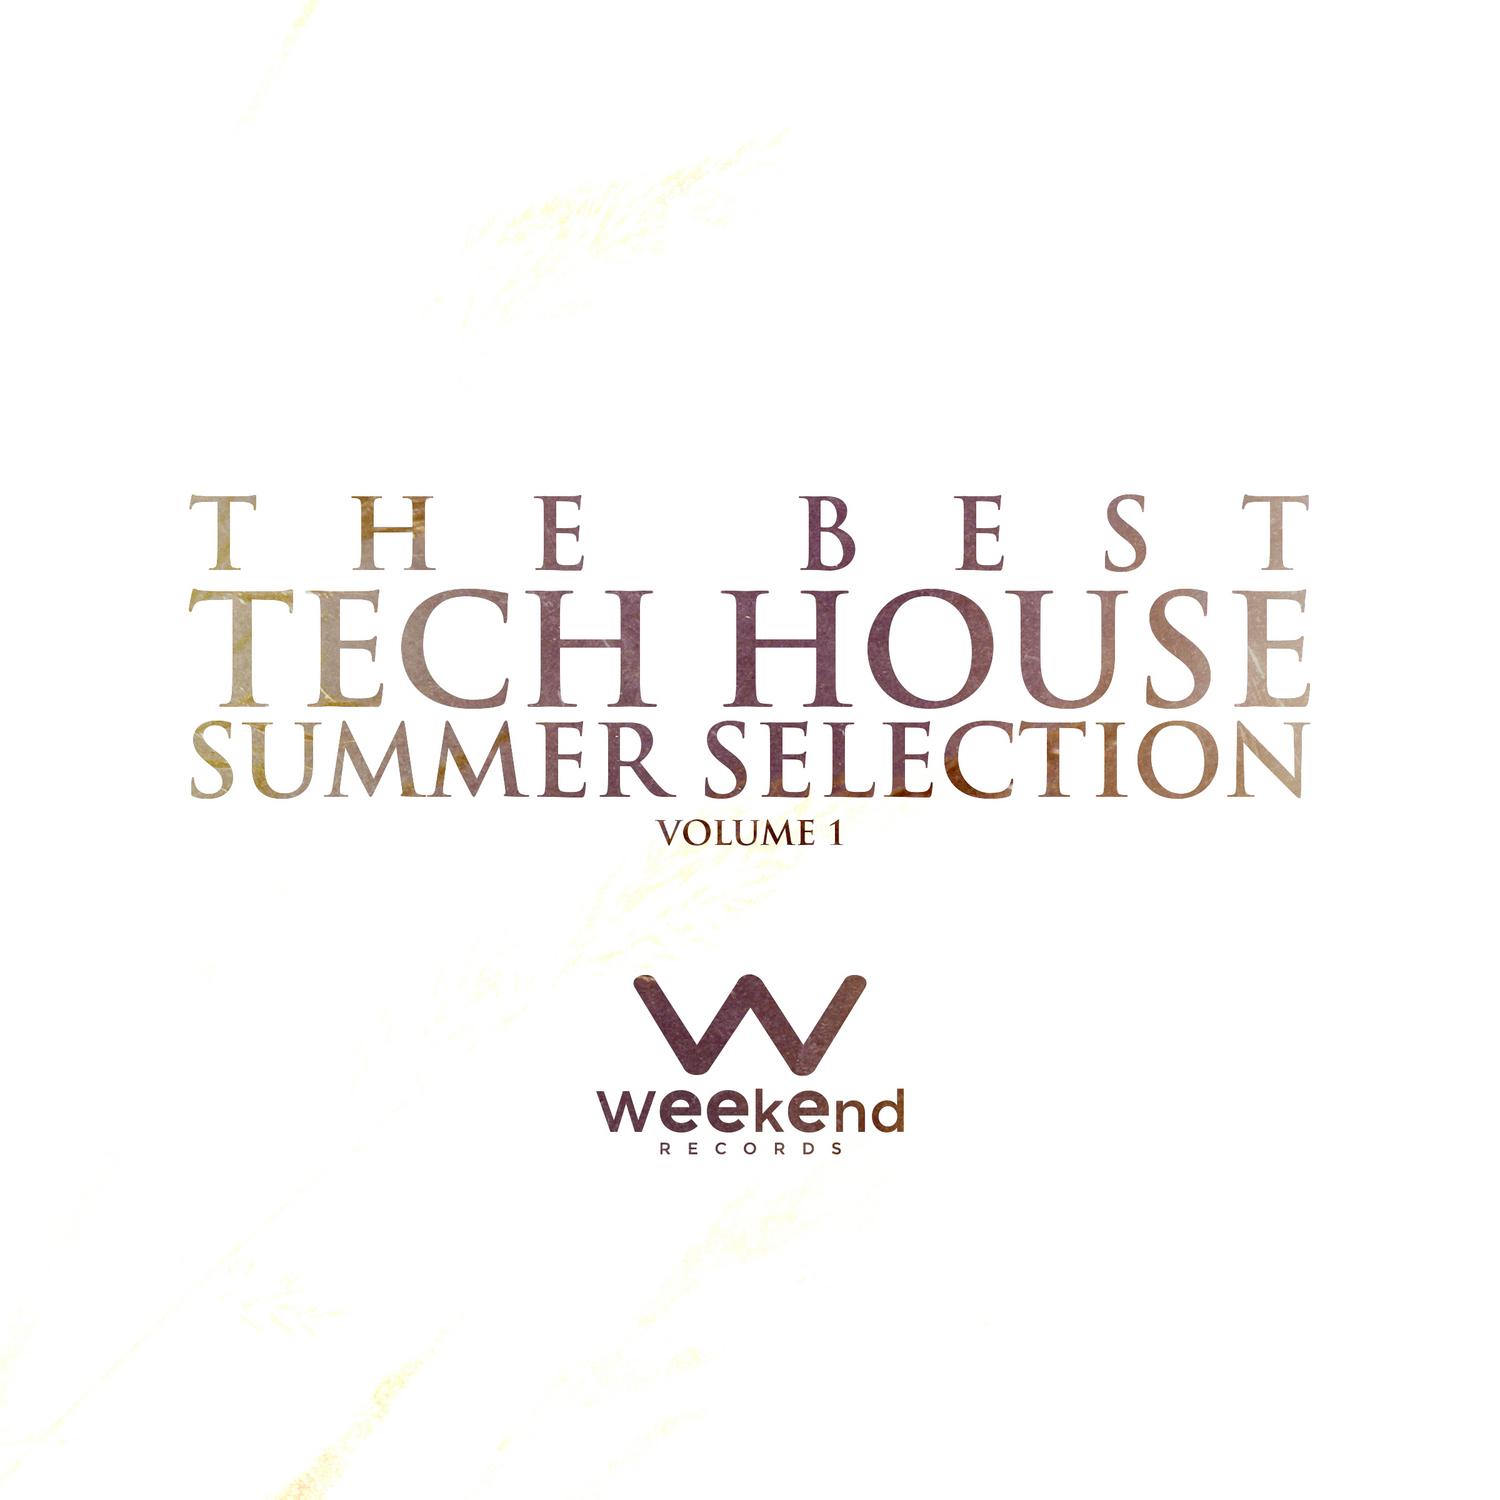 The Best Tech House Summer Selection